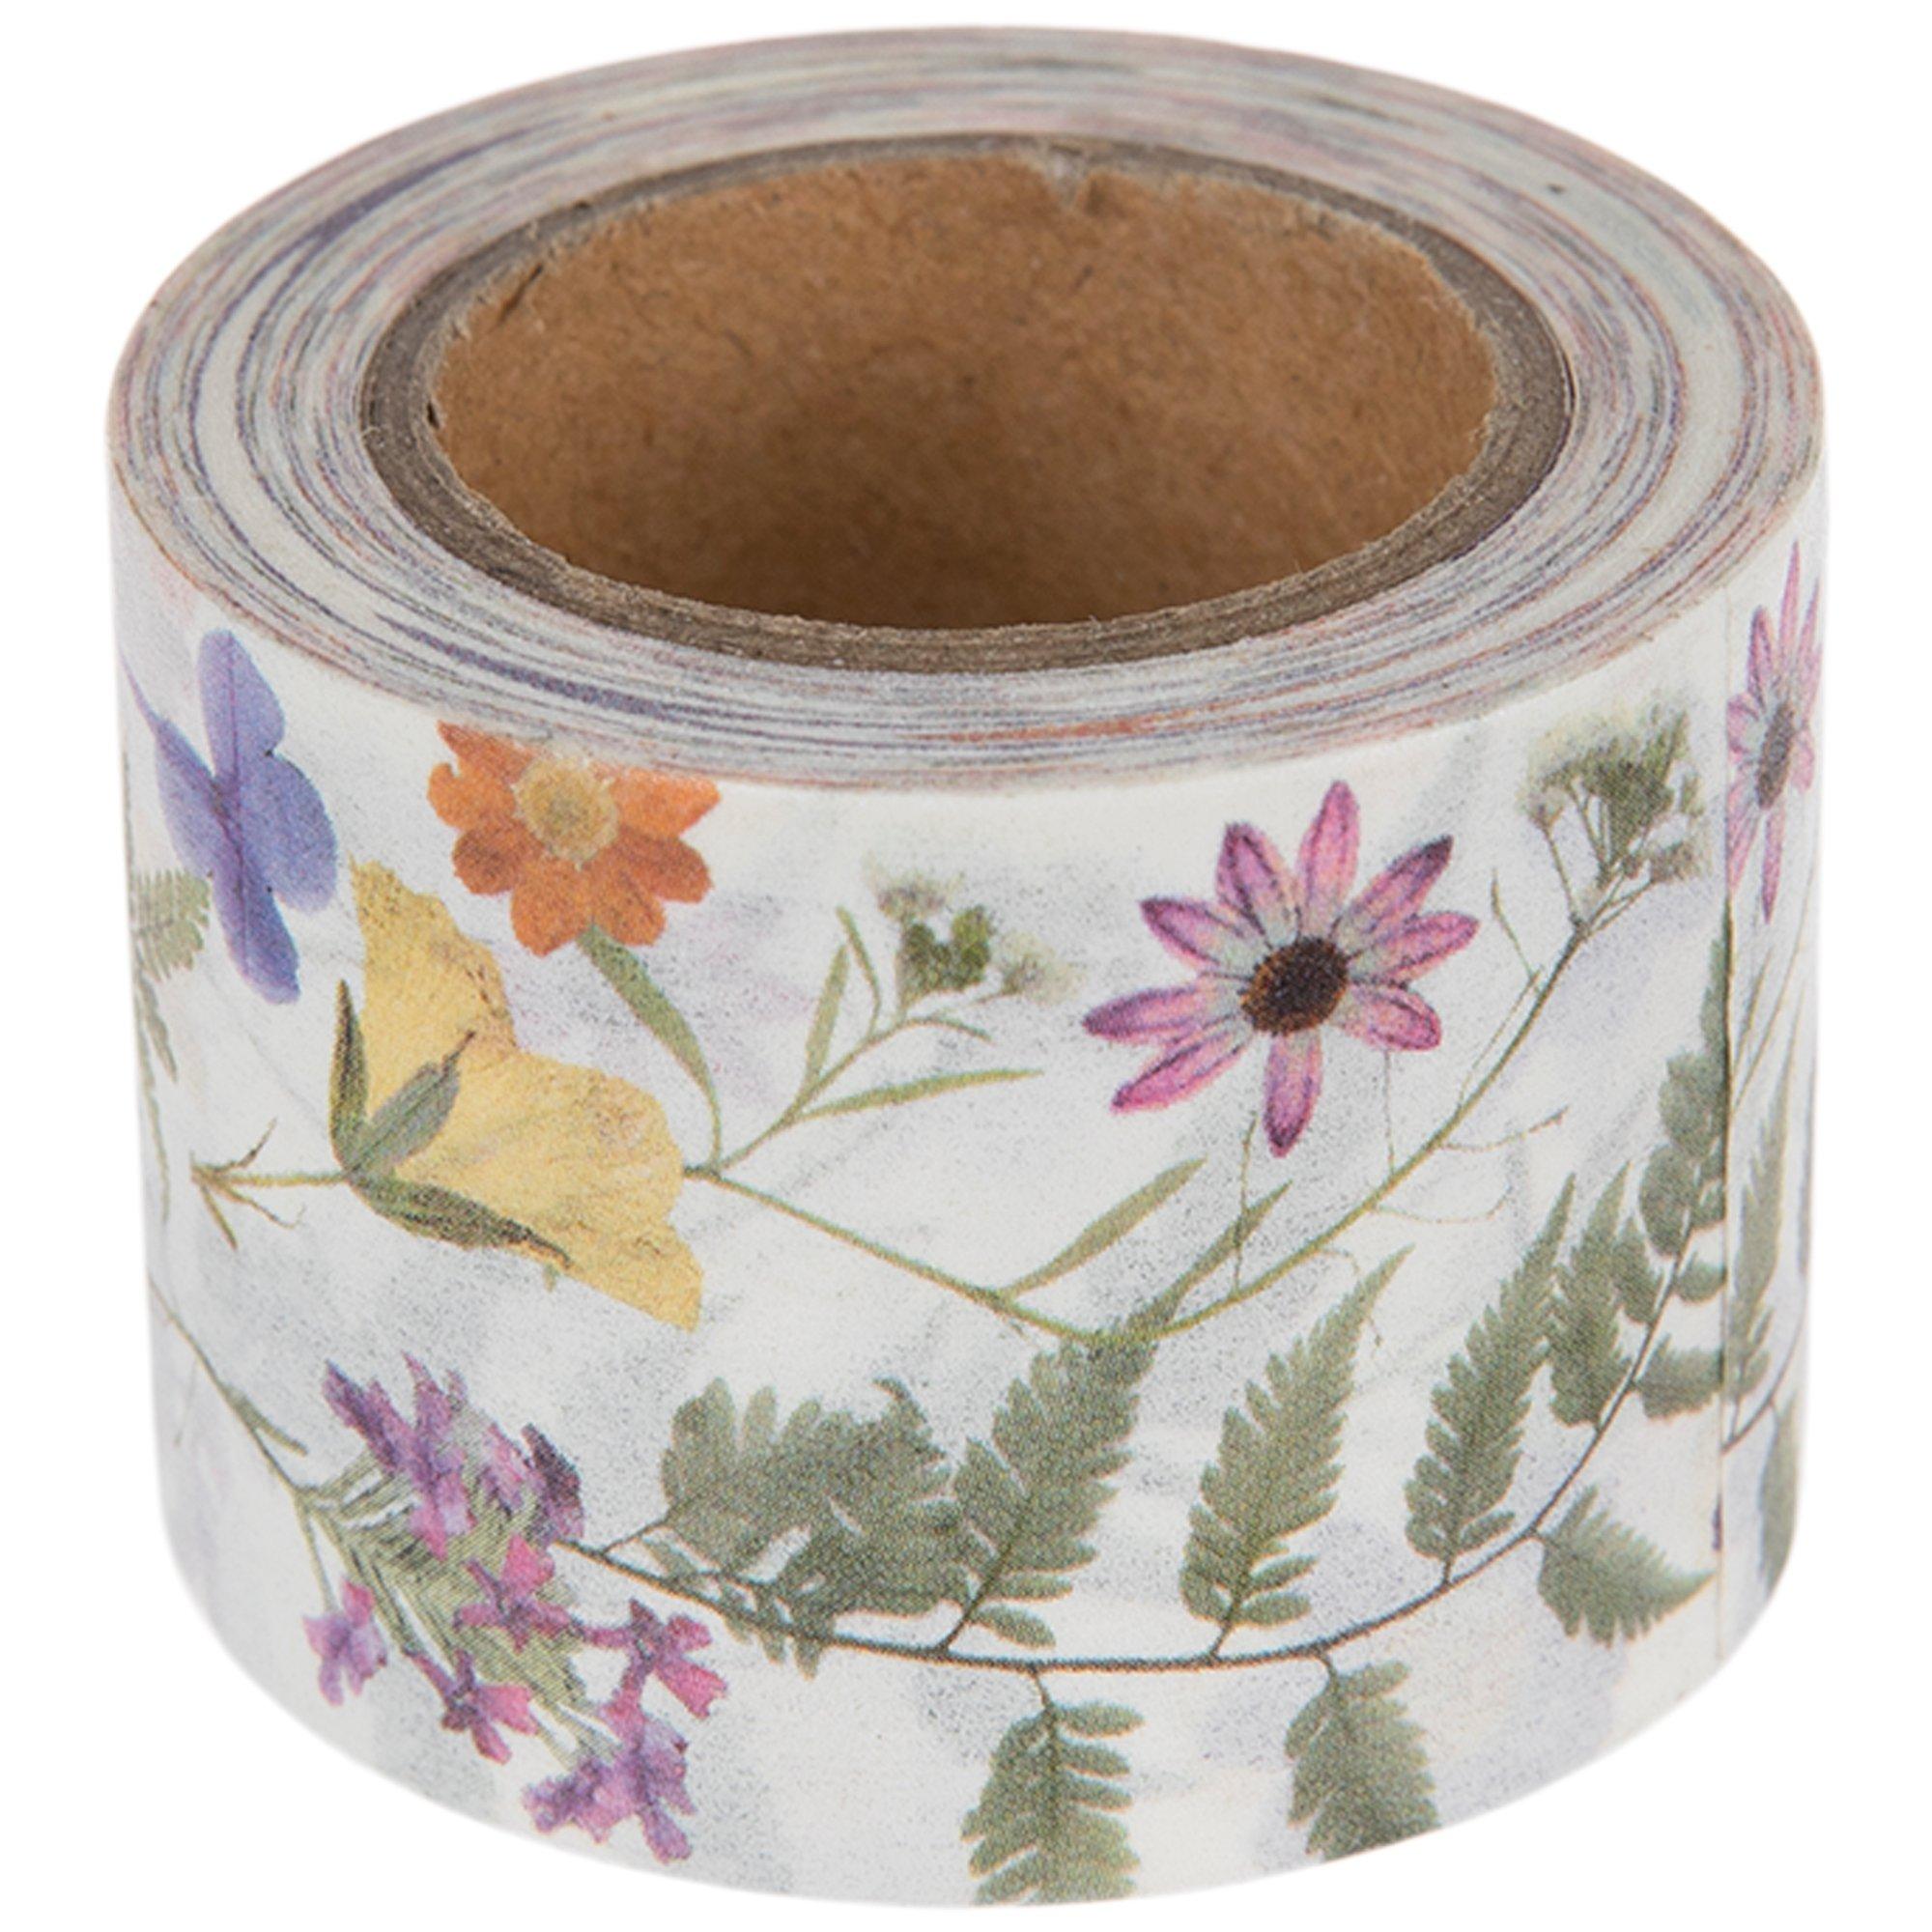 Wholesale Downton Abbey Floral Metallic Washi Tape for your store - Faire